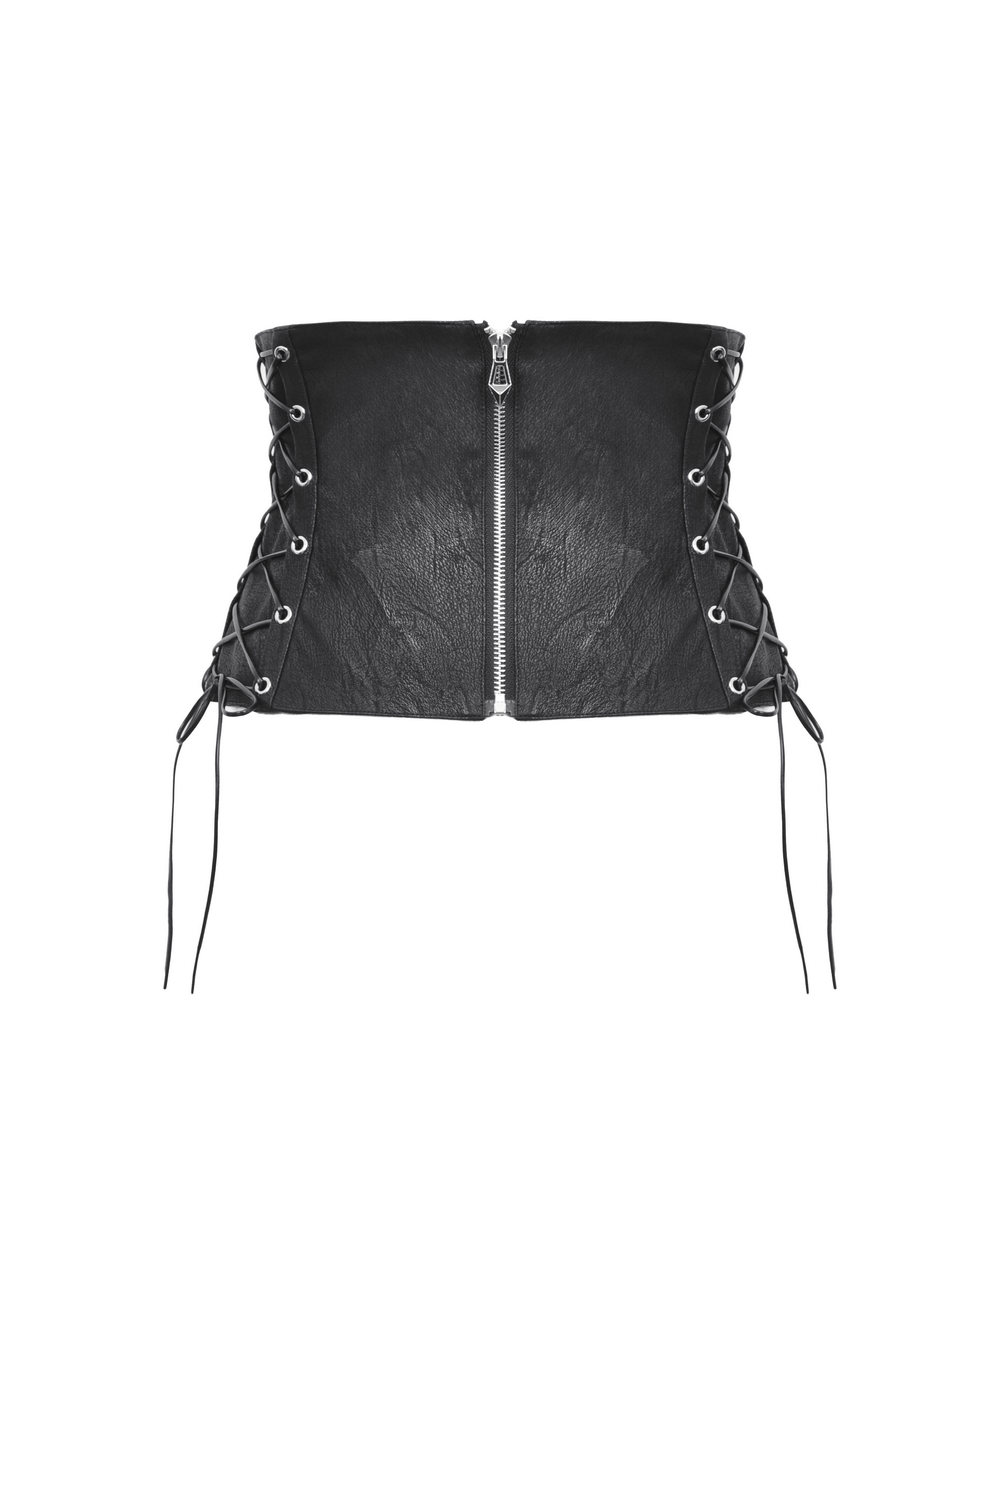 Edgy Lace-Up Black Leather Corset Belt with Buckles